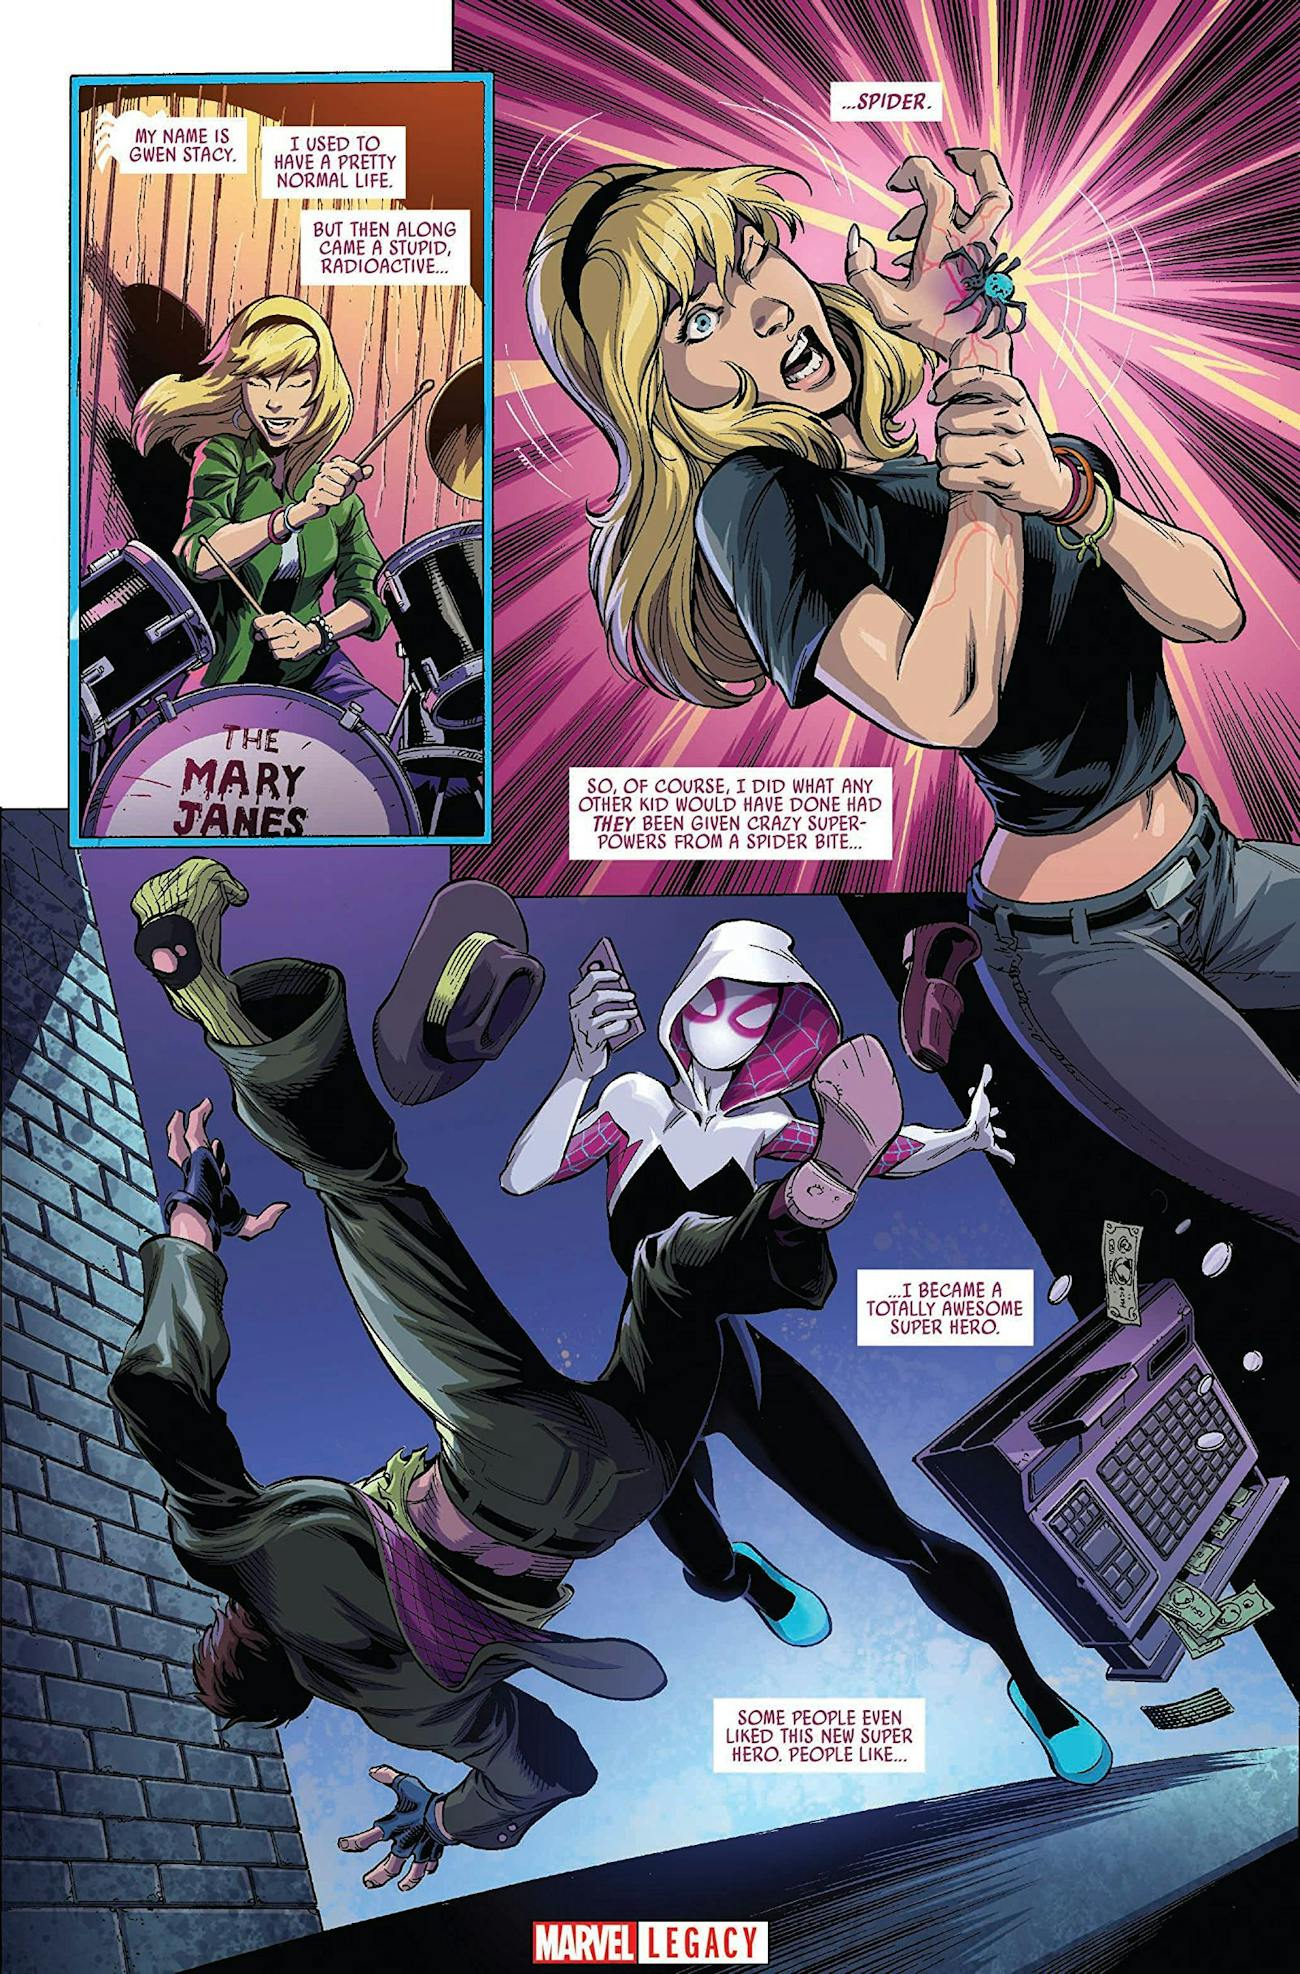 Marvel S Spider Gwen Bryce Dallas Howard Discovers Gwen Stacy S Alter